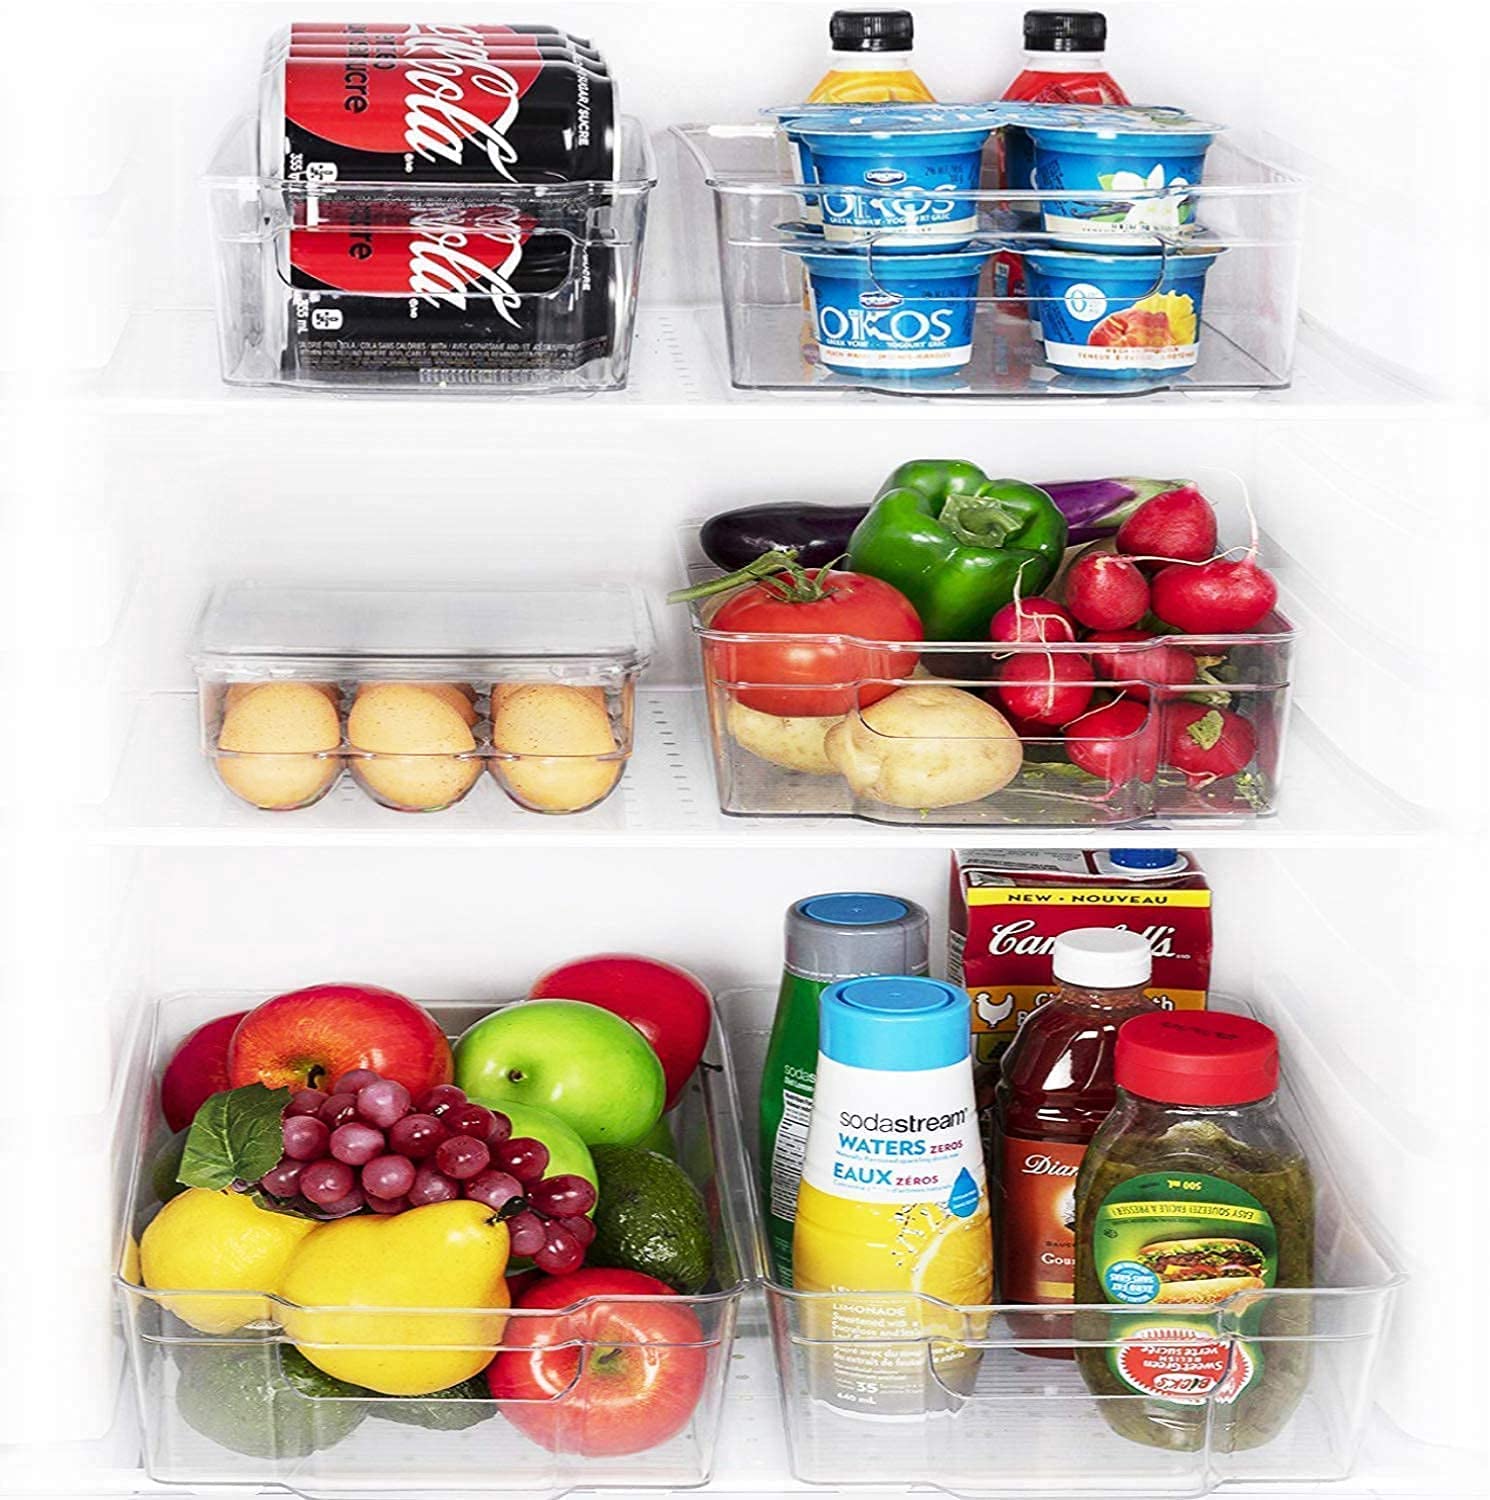 Refrigerator Storage Containers Set of 6 Pcs